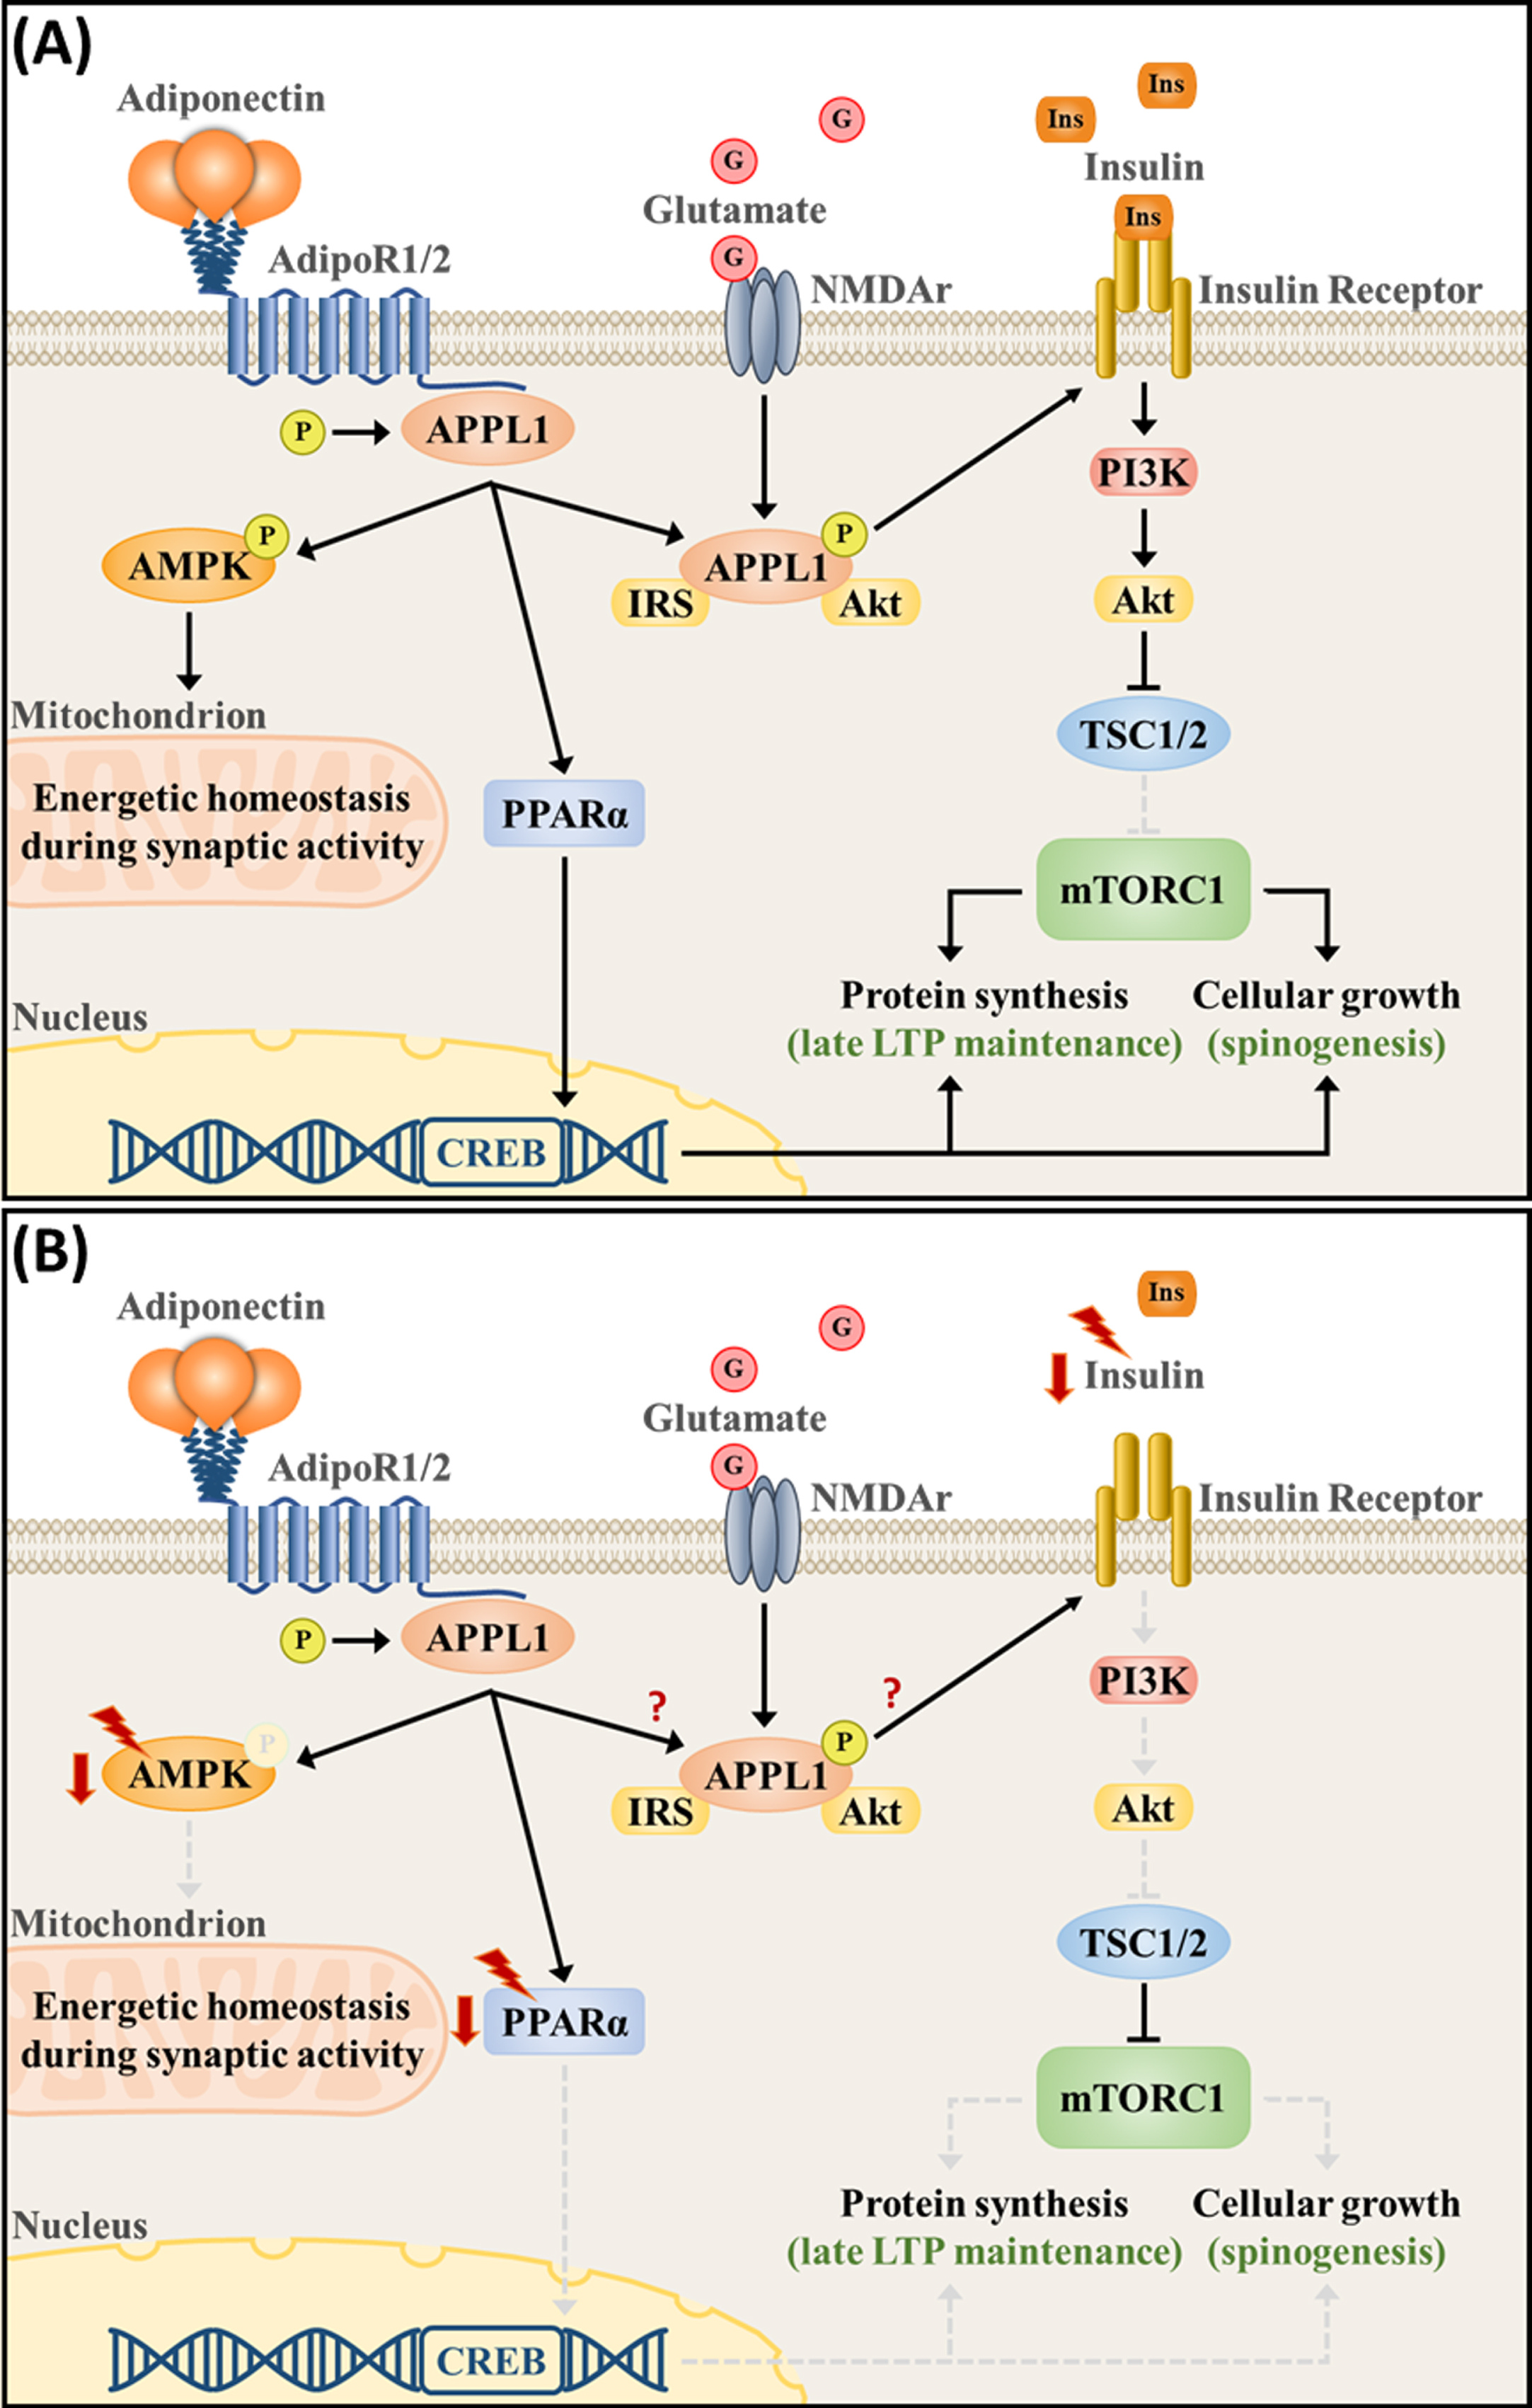 Adiponectin signaling pathway regulates intracellular metabolism and neuronal plasticity in (A) physiological- and (B) chronic stress-associated conditions. (A) Activation of the adiponectin receptors, which are present at synapses, orchestrates signaling pathways that are essential for proper bioenergetic balance and plasticity. AdipoR1/2 phosphorylates the APPL1 and activates the AMPK and PPARα pathways, whereas APPL1 itself forms a complex with NMDA receptors and couples neuronal activity with the activation of the insulin signaling pathway (PI3K/Akt). PI3K/Akt induces mTORC1 activity, protein synthesis, and cellular growth by suppressing TSC1/2. Upon synaptic activation, increased AMPK signaling is necessary to upregulate substrate oxidation, mitochondrial respiration and biogenesis, maintaining the intracellular energetic reserves necessary for LTP maintenance. PPARα, on the other hand, directly upregulated CREB transcription. (B) Chronic stress downregulates PPARα and AMPK expression and phosphorylation, as well as downregulates the expression of upstream modulators of the PI3K/Akt pathway, such as vascular endothelial growth factor and insulin. Currently, a direct connection between APPL1 and stress-associated deficits remains unknown.